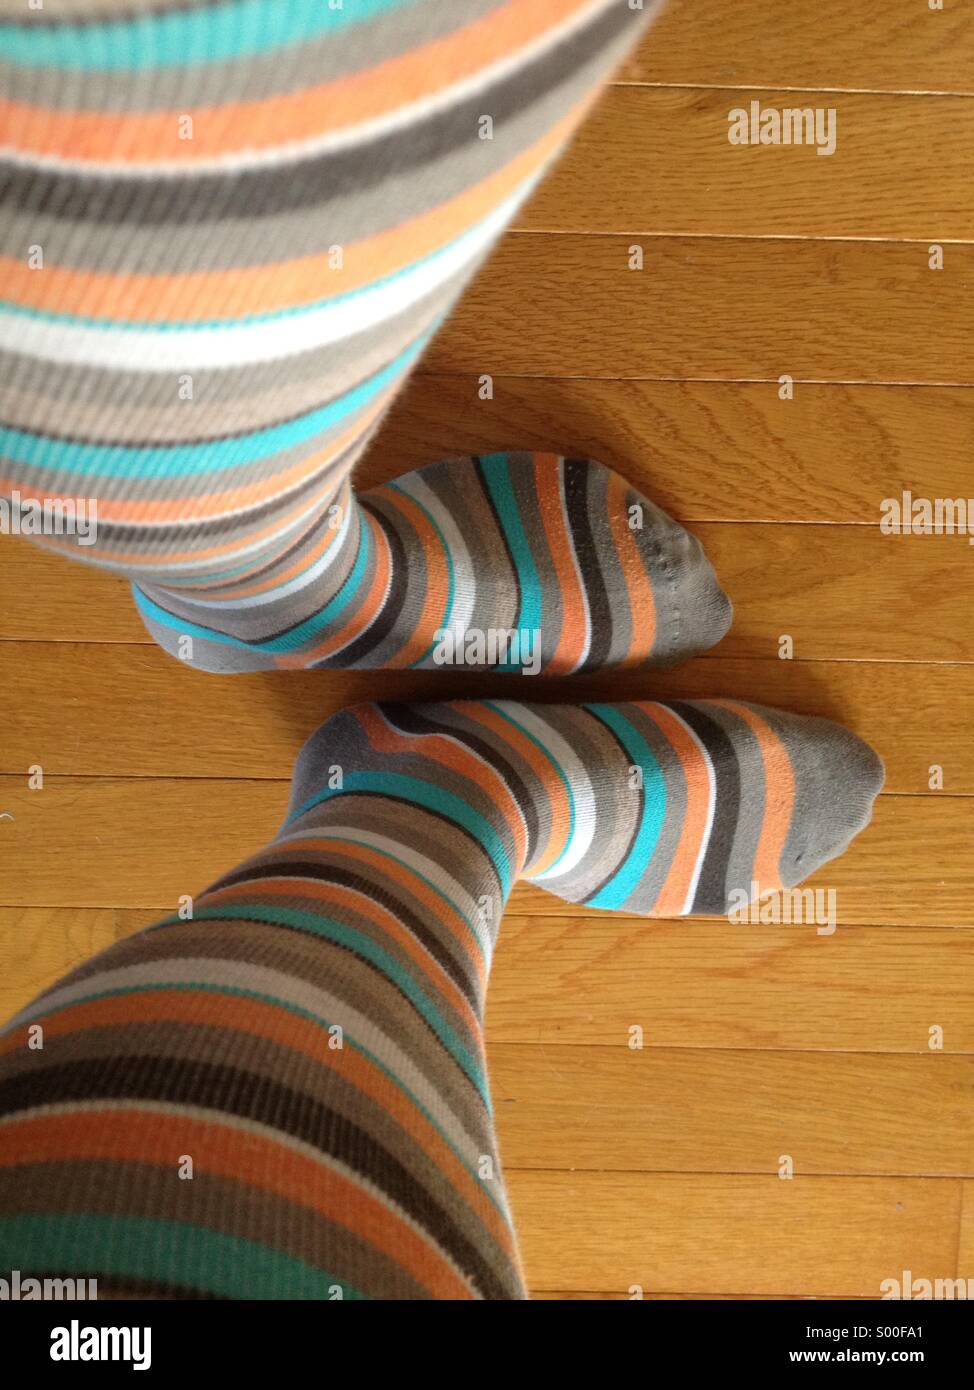 Girl's legs wearing striped knee socks; view from above Stock Photo